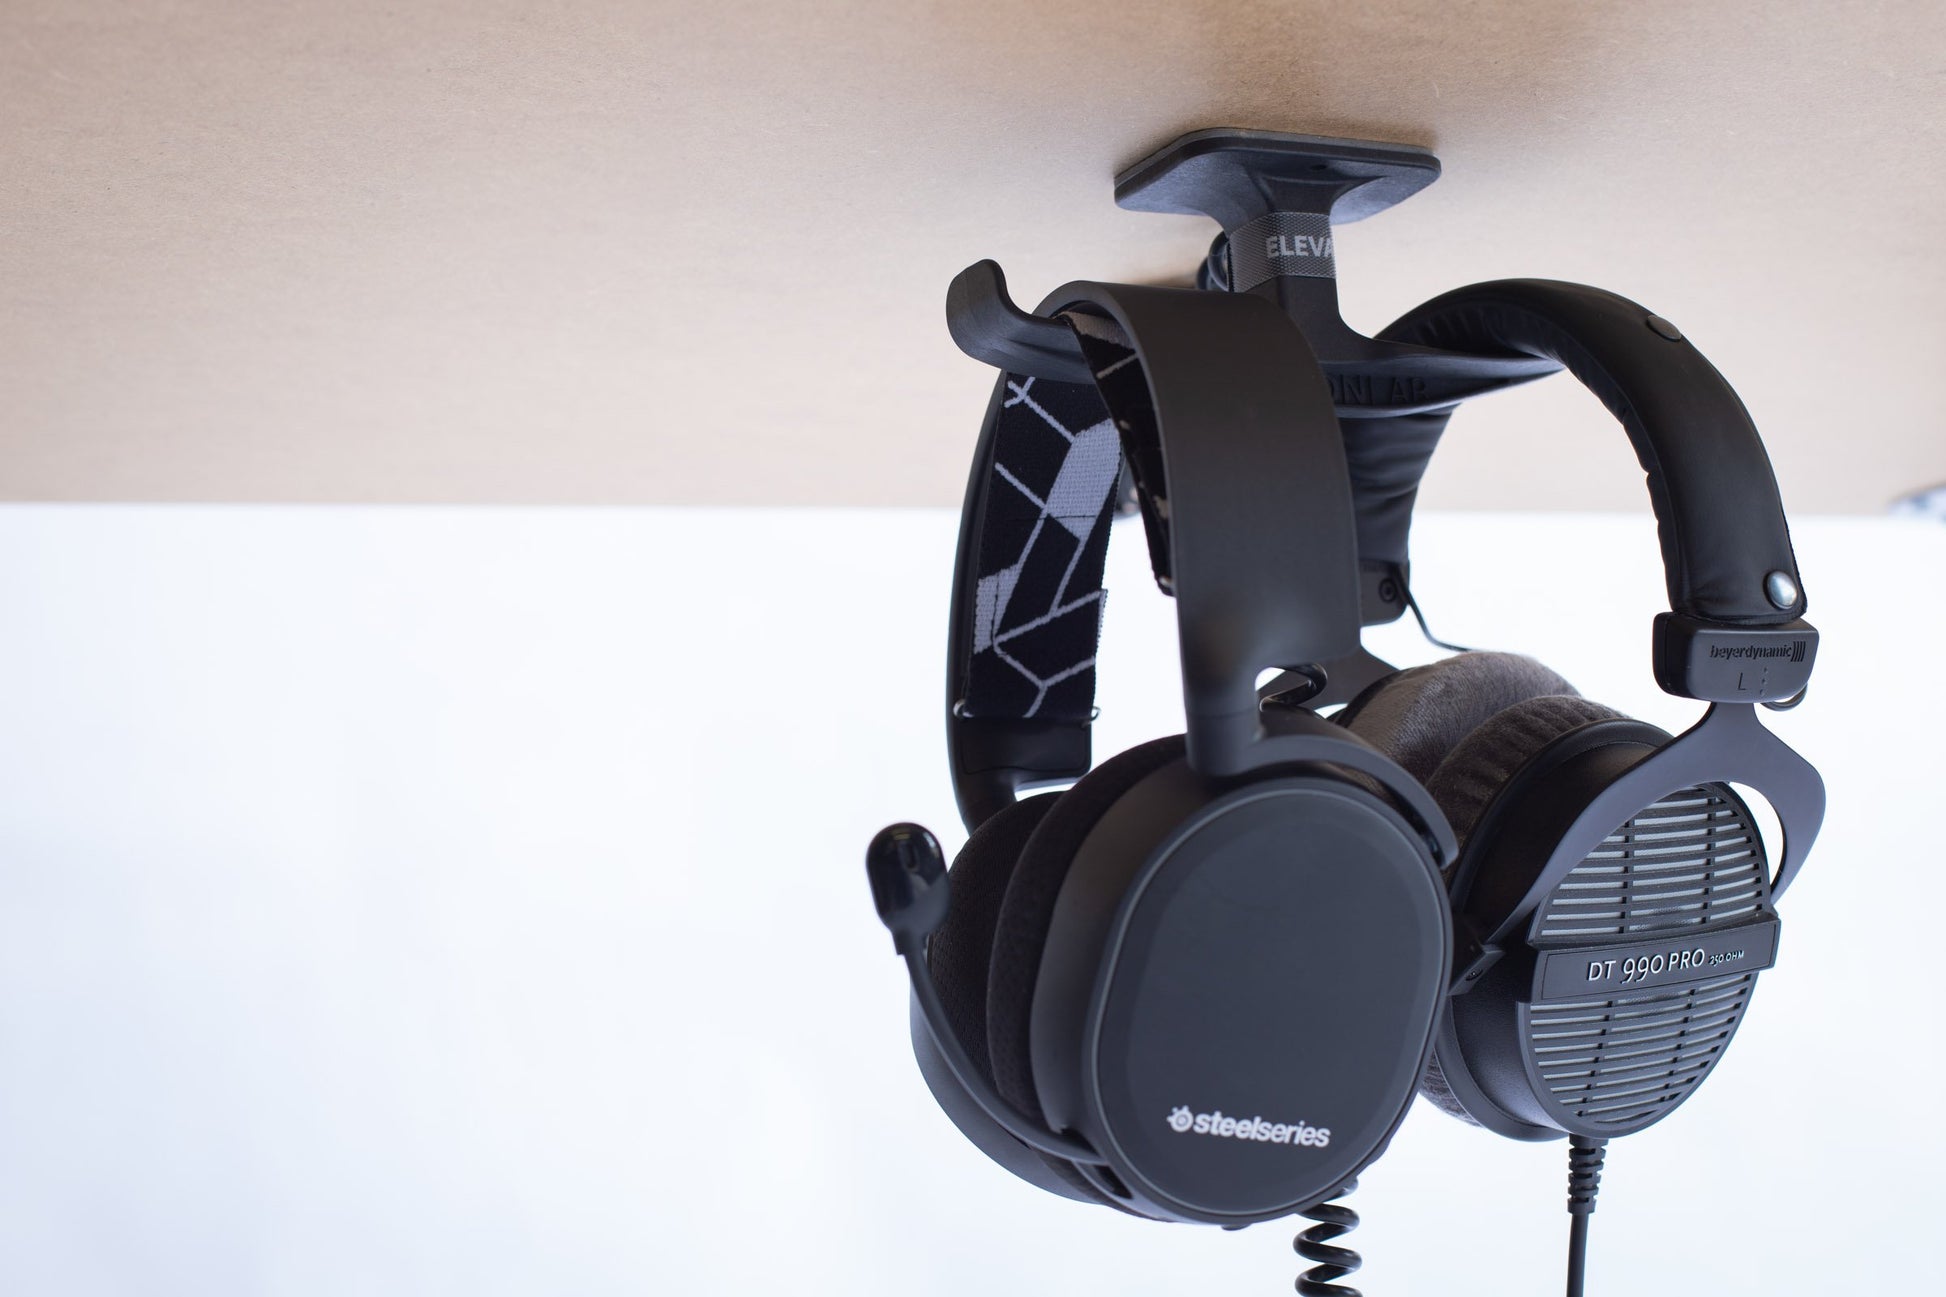 Elevation Lab Anchor Pro Headphone Mount - The Usual